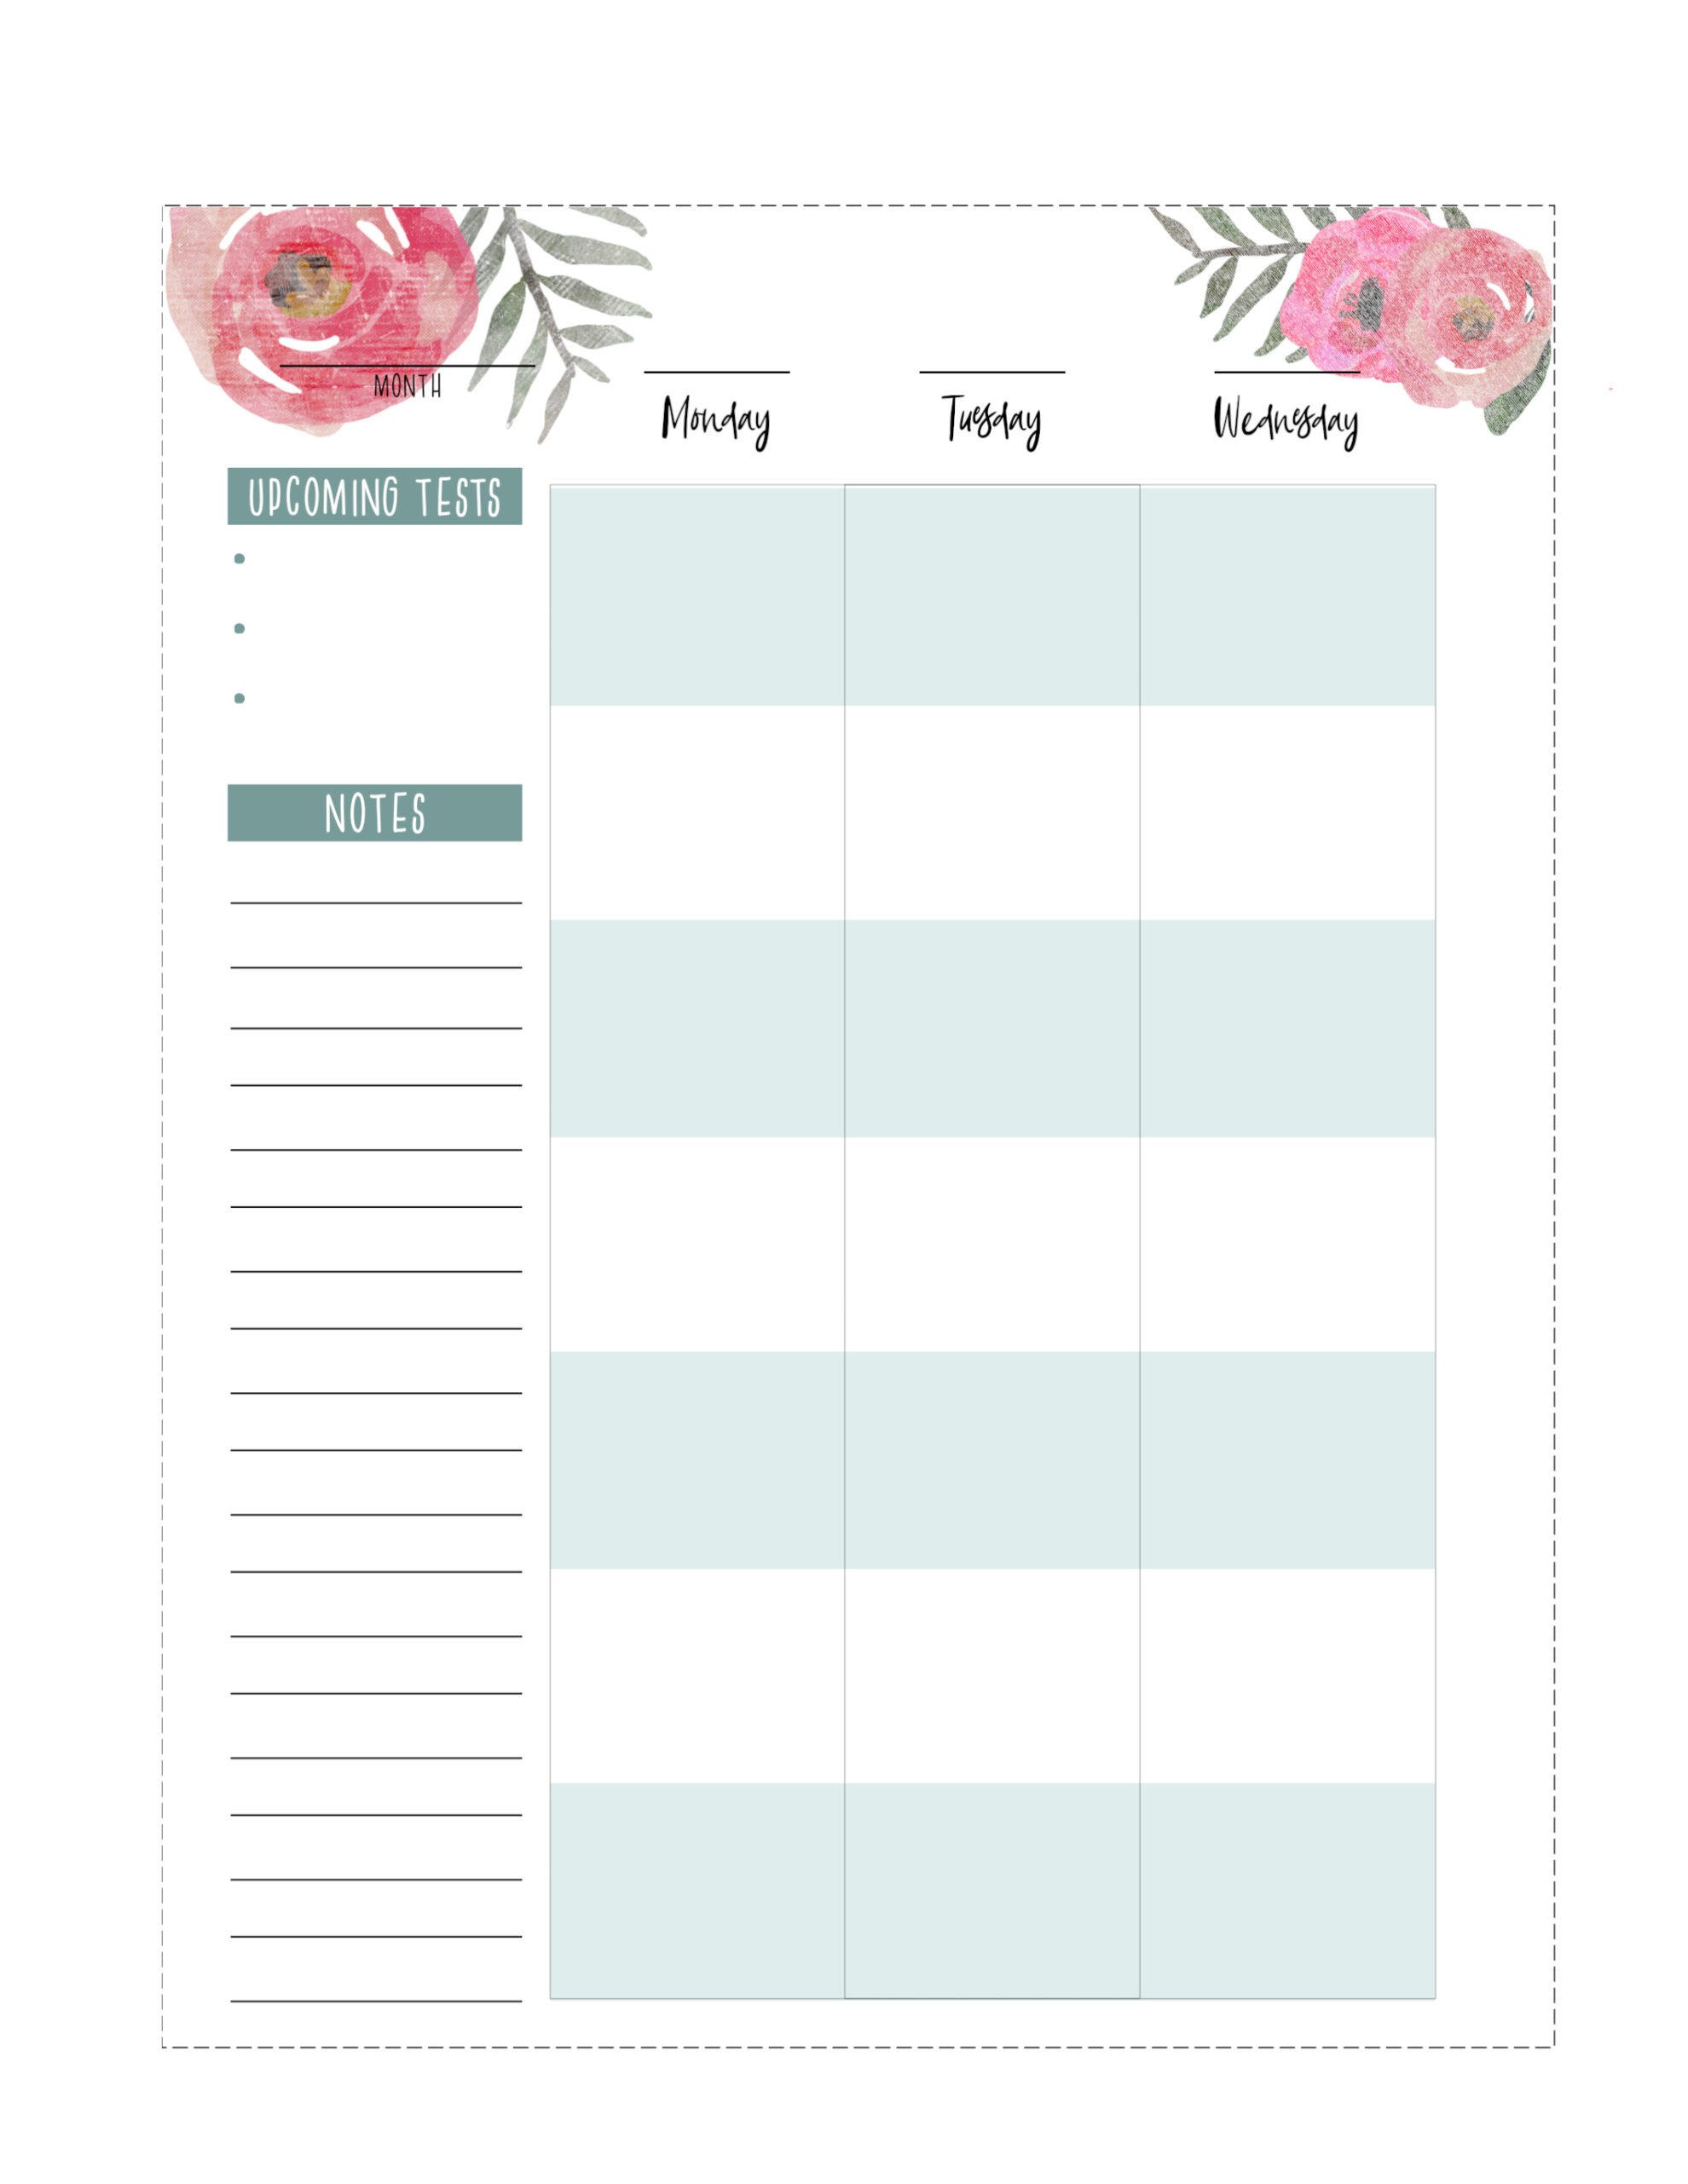 print to scale classic happy planner